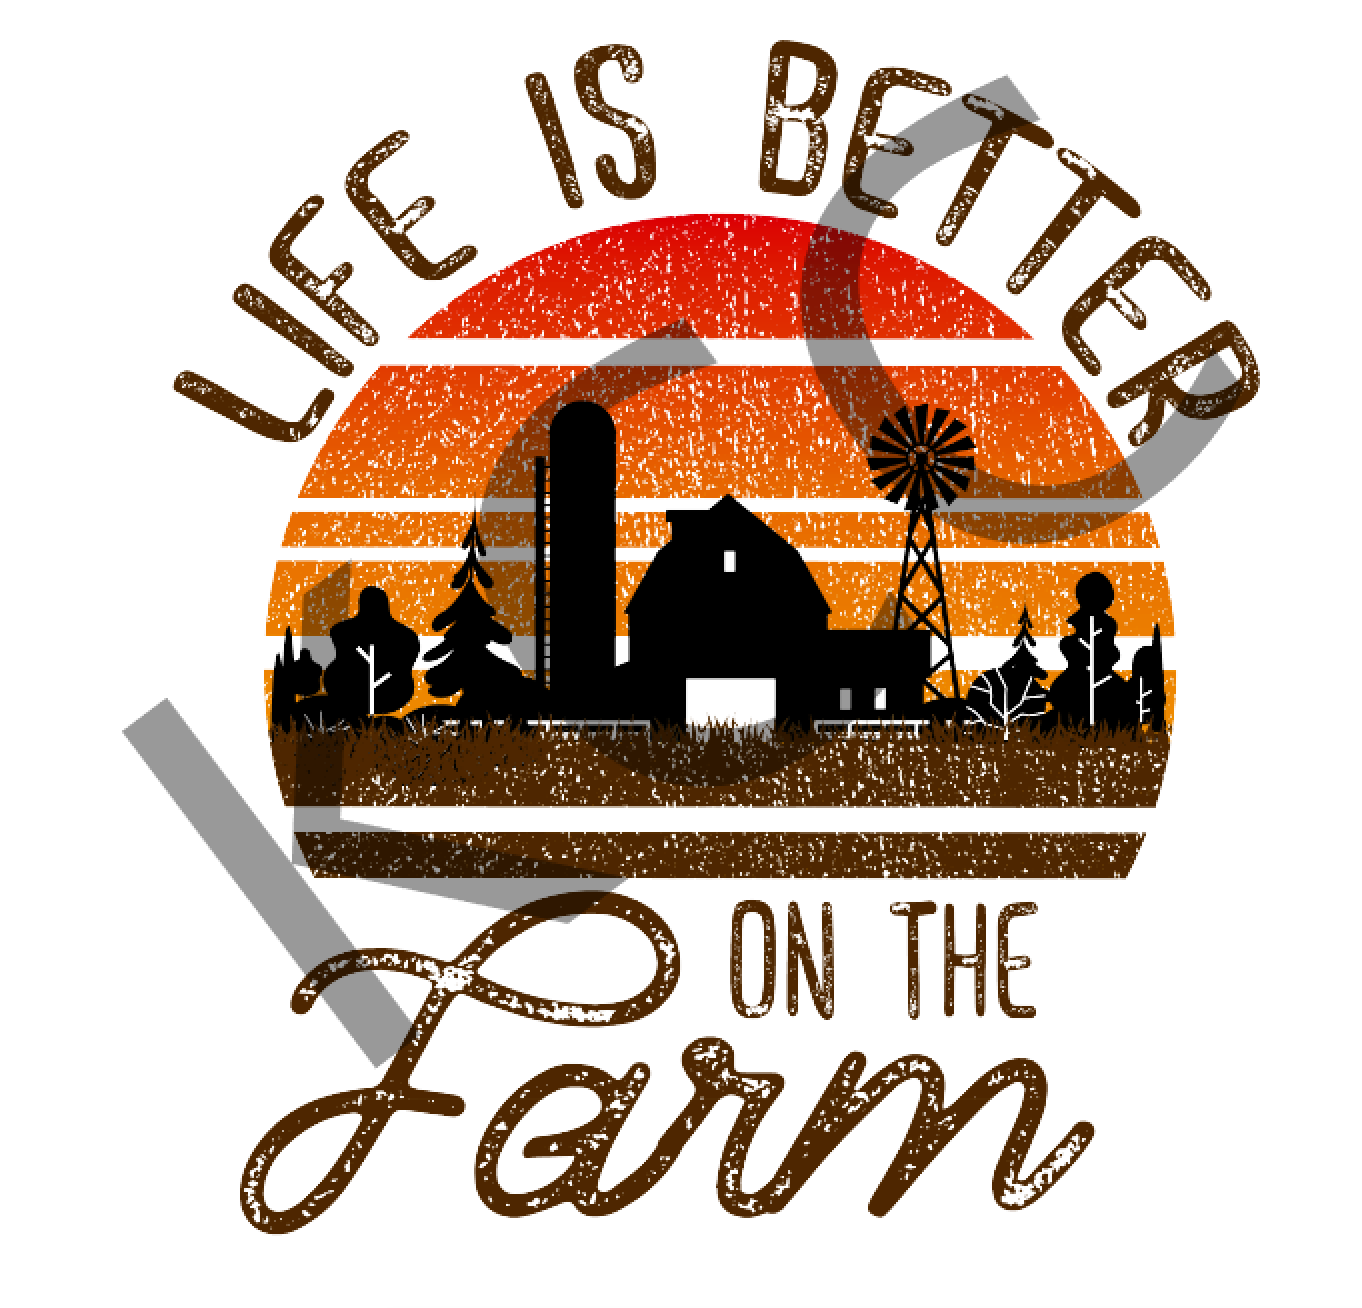 Life Is Better At The Farm